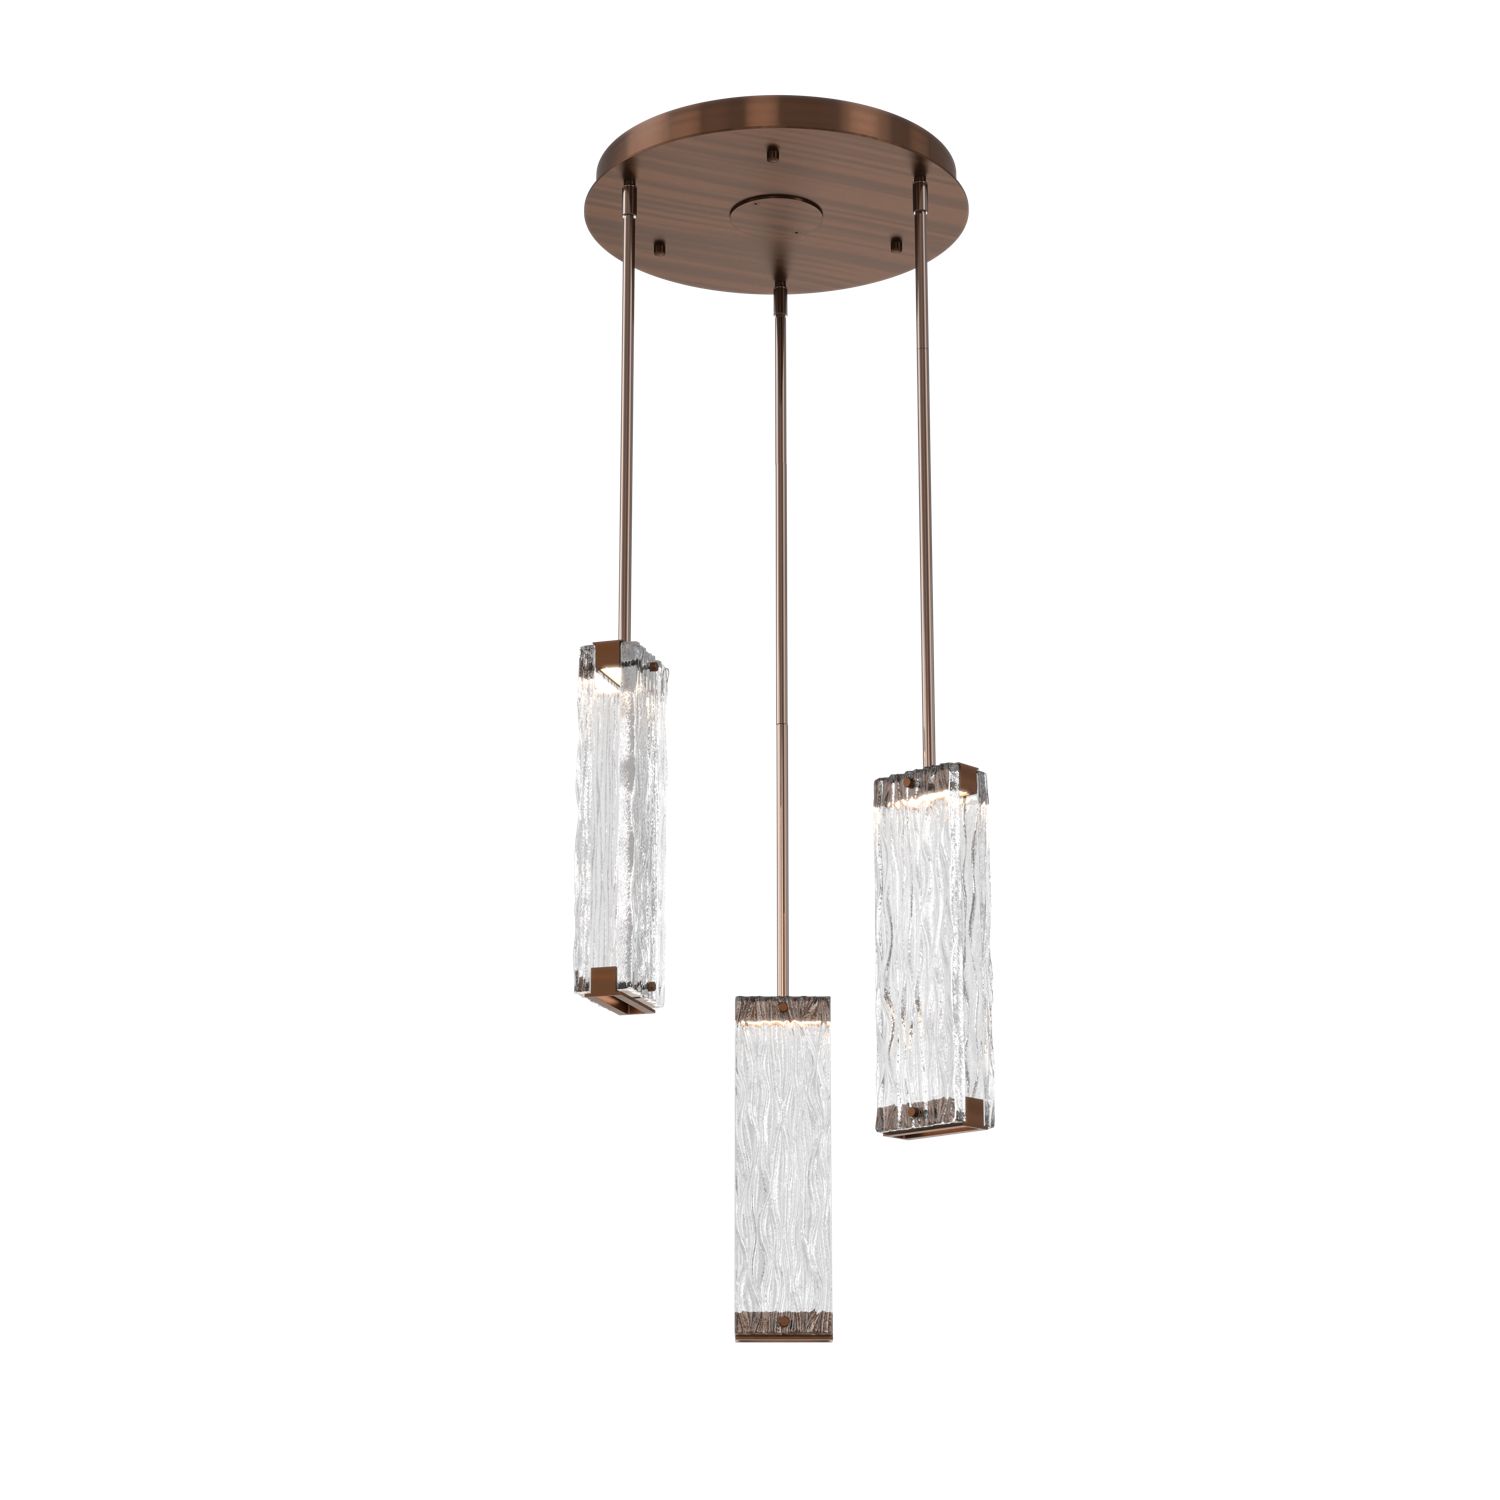 CHB0090-03-RB-TT-Hammerton-Studio-Tabulo-3-light-multi-pendant-chandelier-with-oil-rubbed-bronze-finish-and-clear-tidal-cast-glass-shade-and-LED-lamping